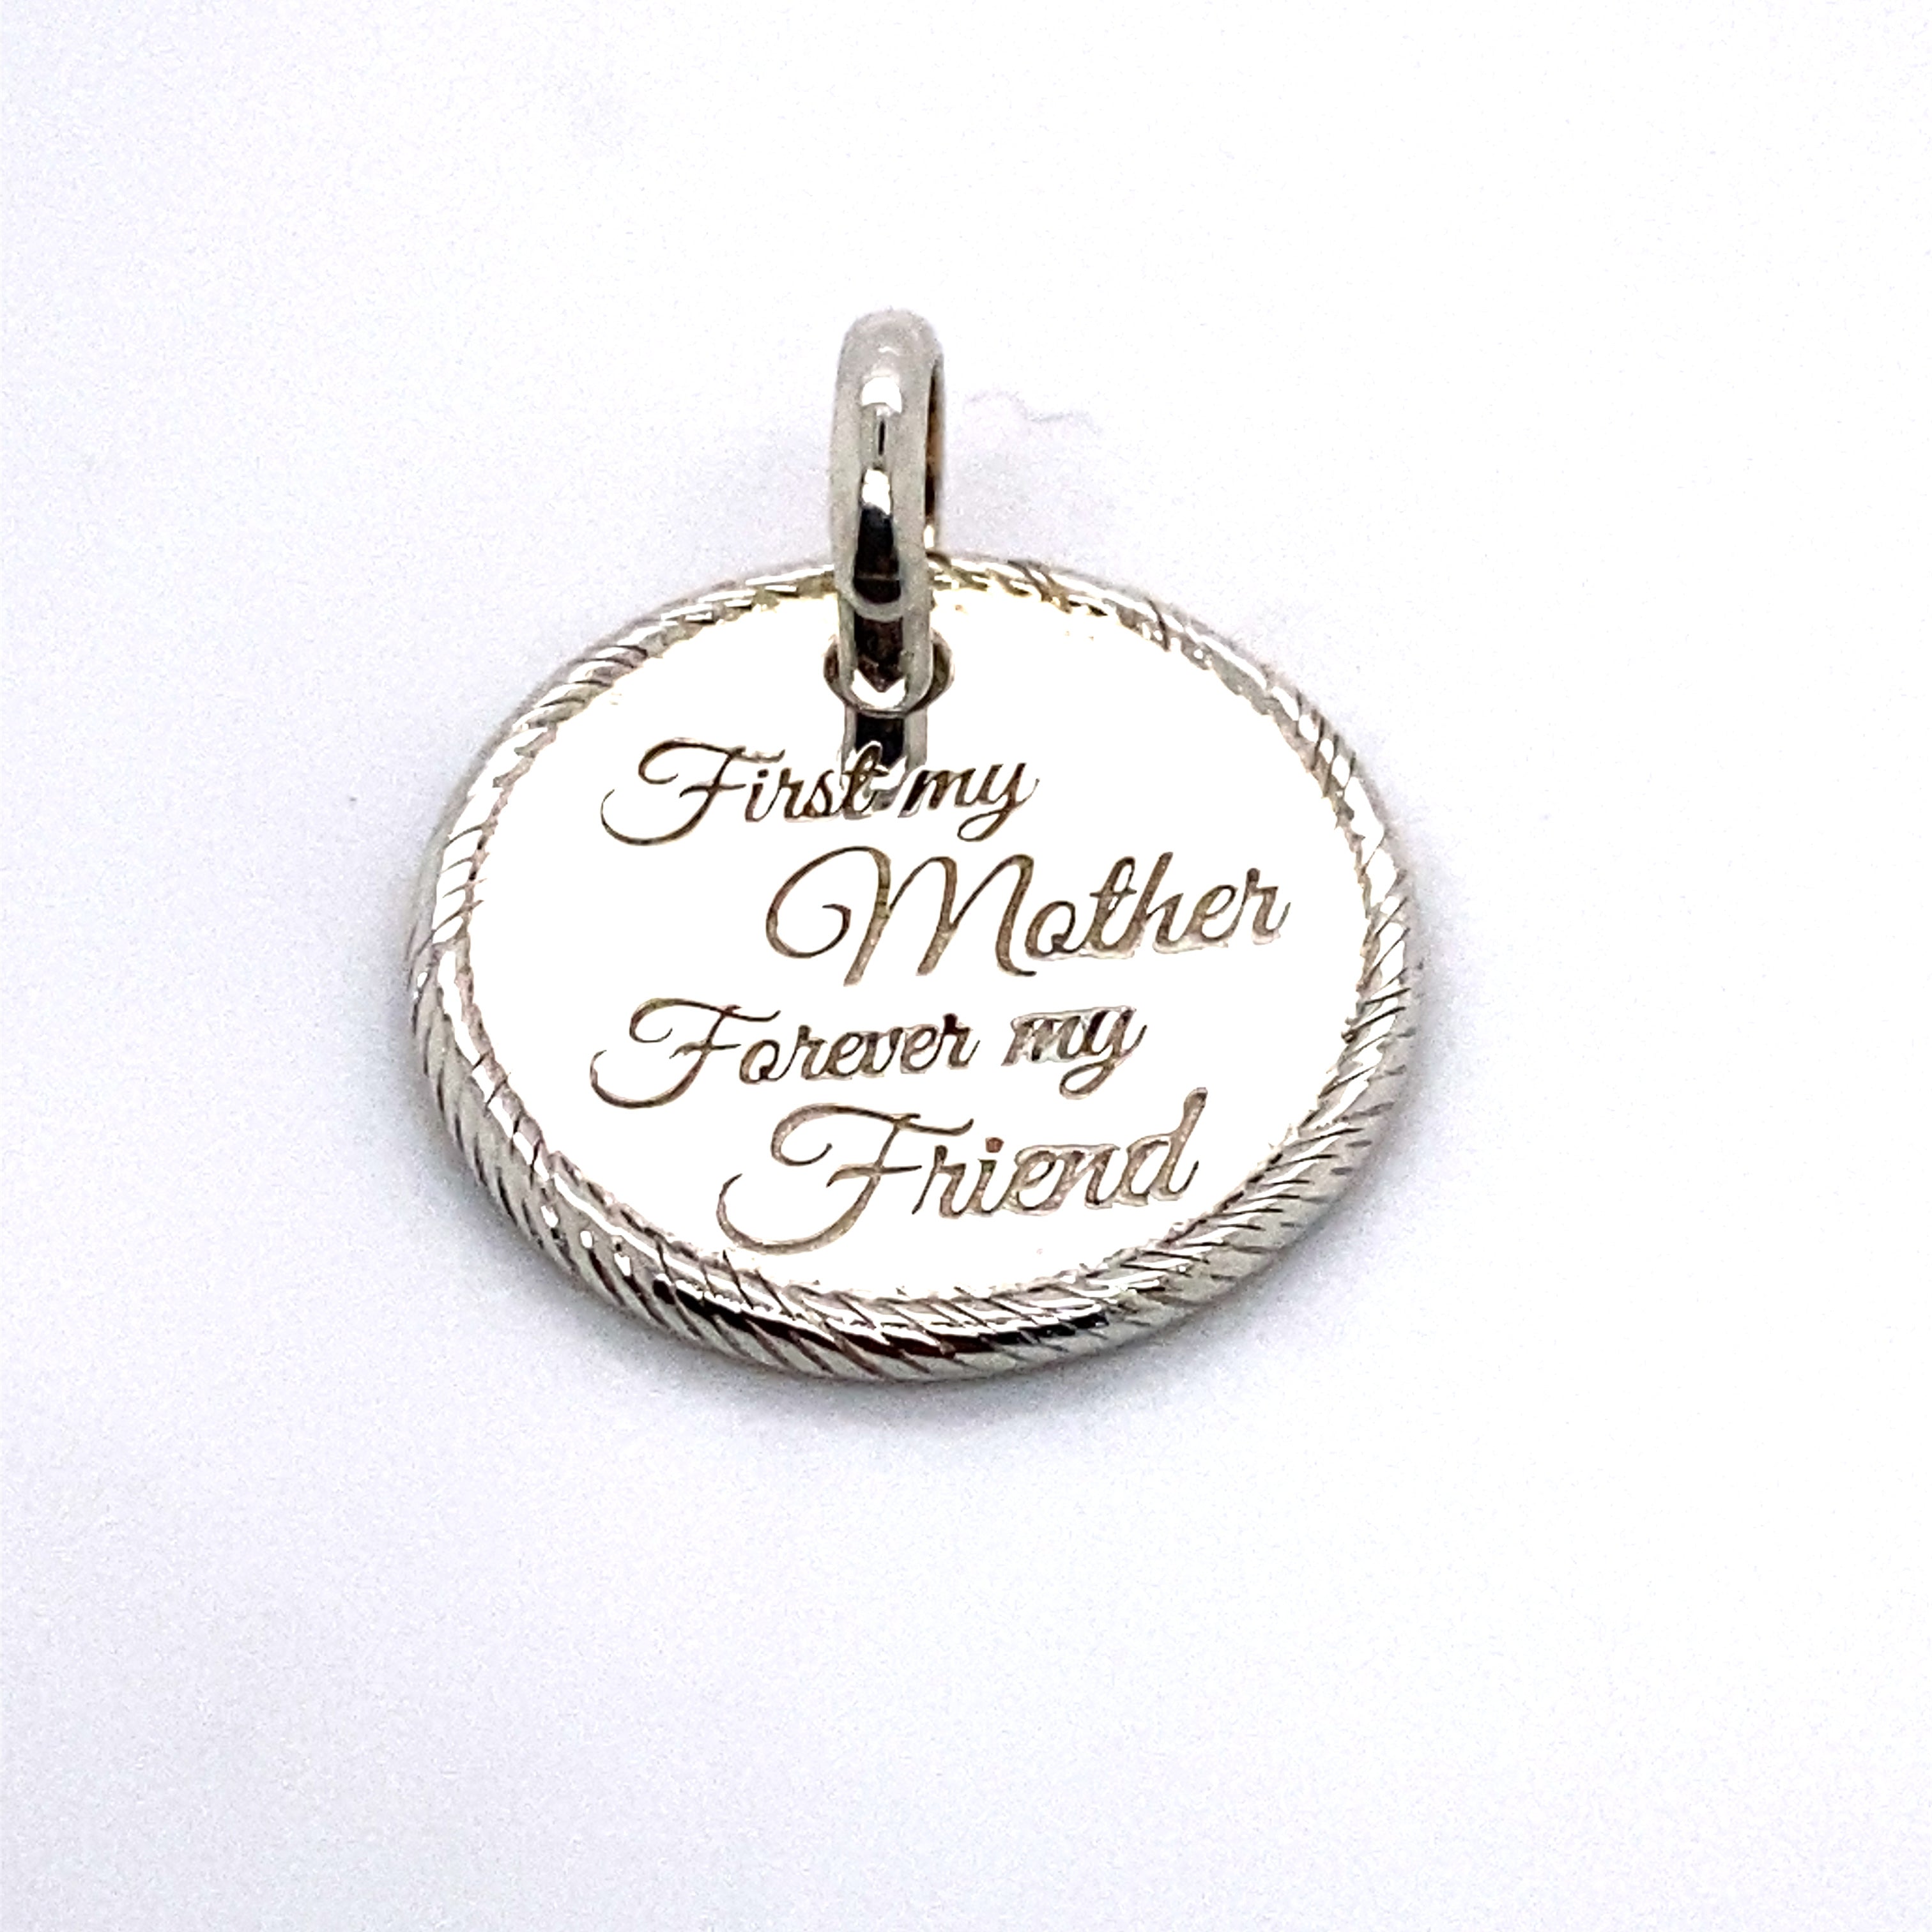 first my mother forever my friend pendant charm